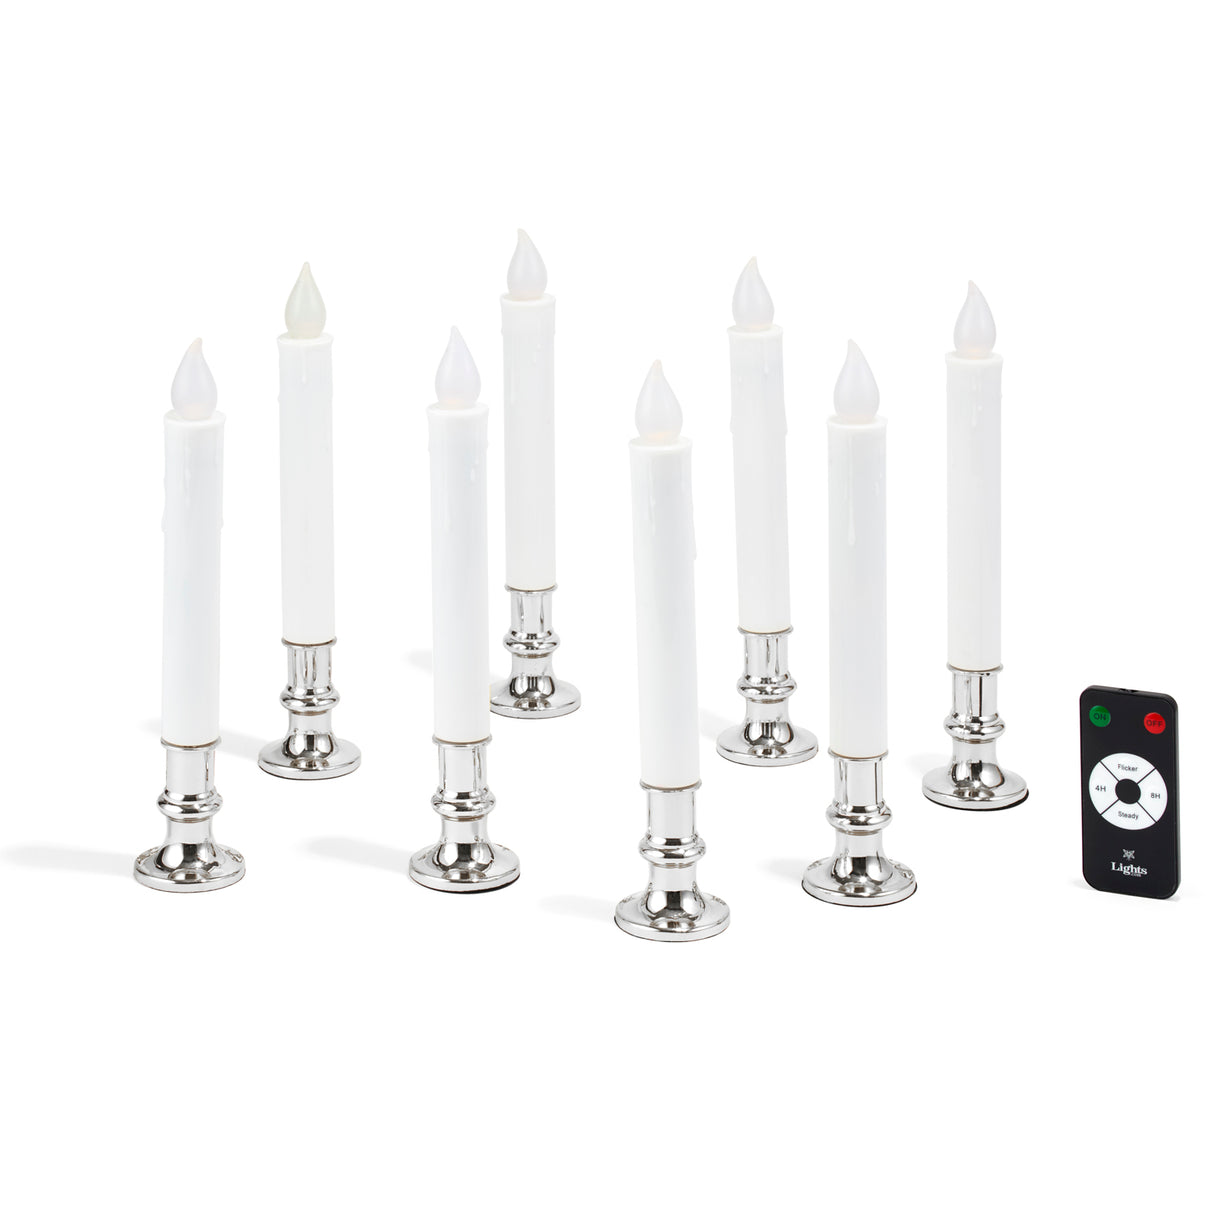 White 7" Flameless Resin Taper Candles with Silver Bases, Set of 8